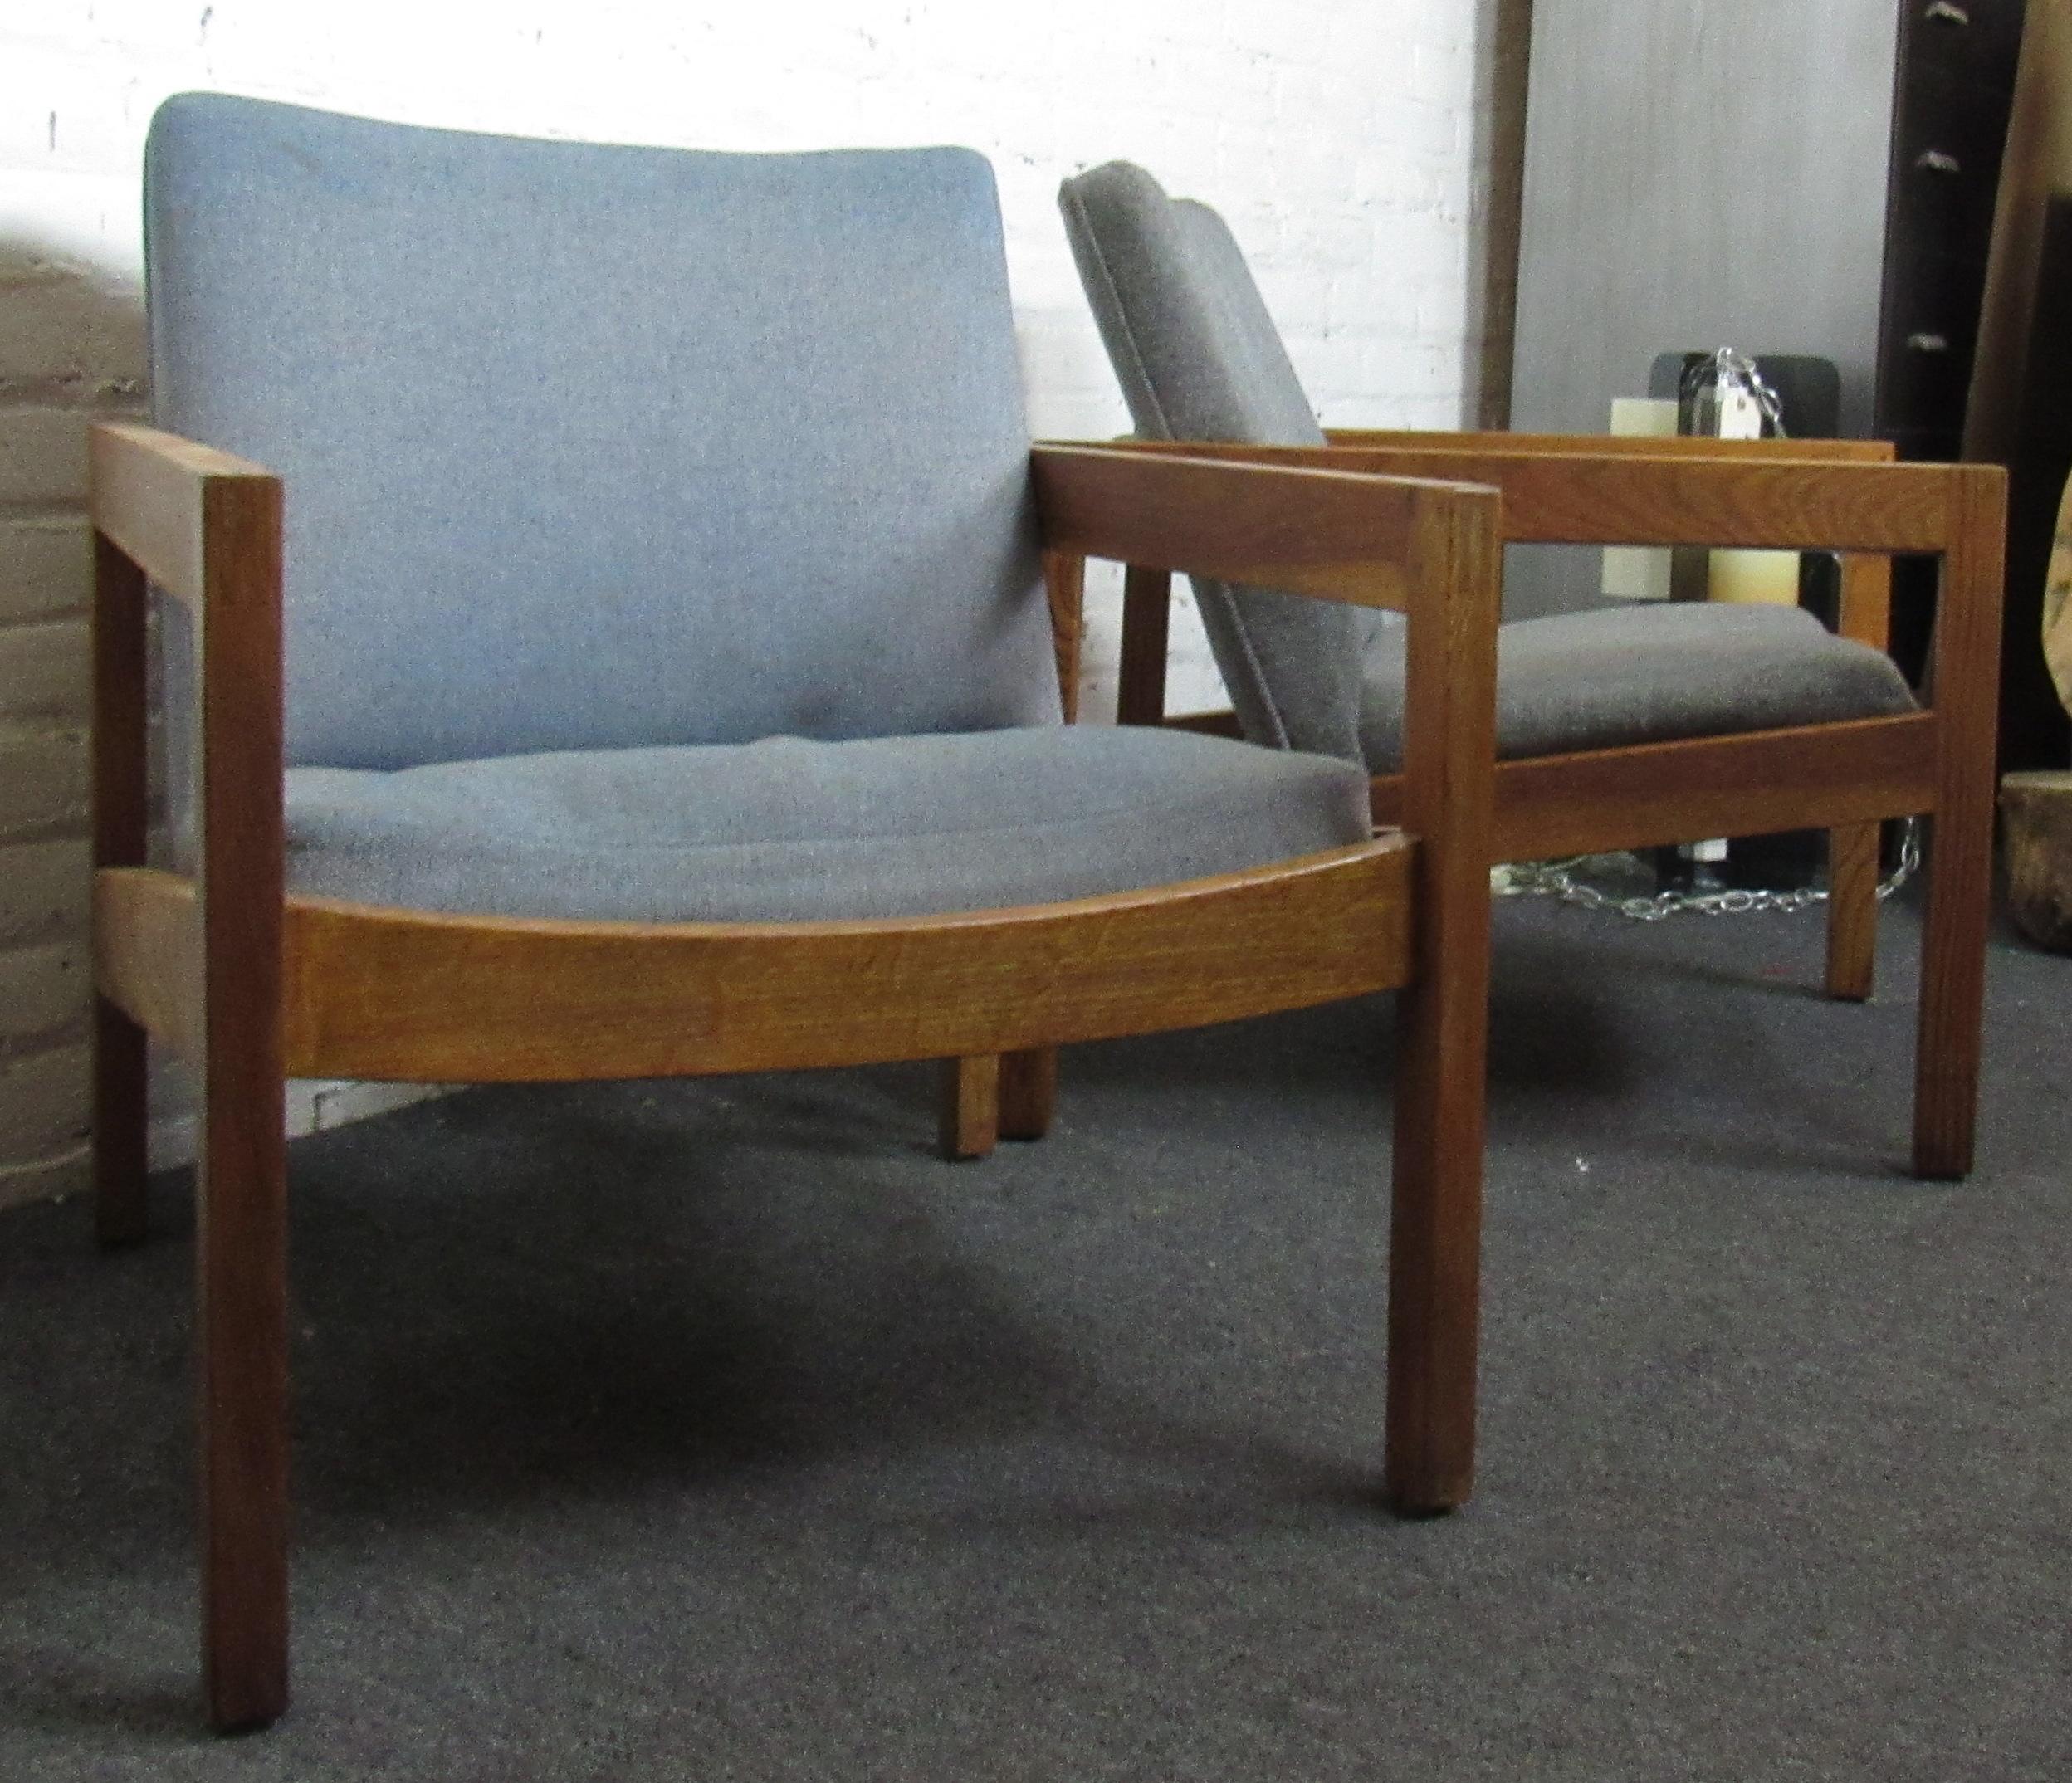 Beautiful set of two vintage modern baby blue lounge chairs. The chairs sit on a frame of richly stained wood with beautifully notched joints. These supremely comfortable lounge chairs, perfect for reading or having a relaxing morning coffee would